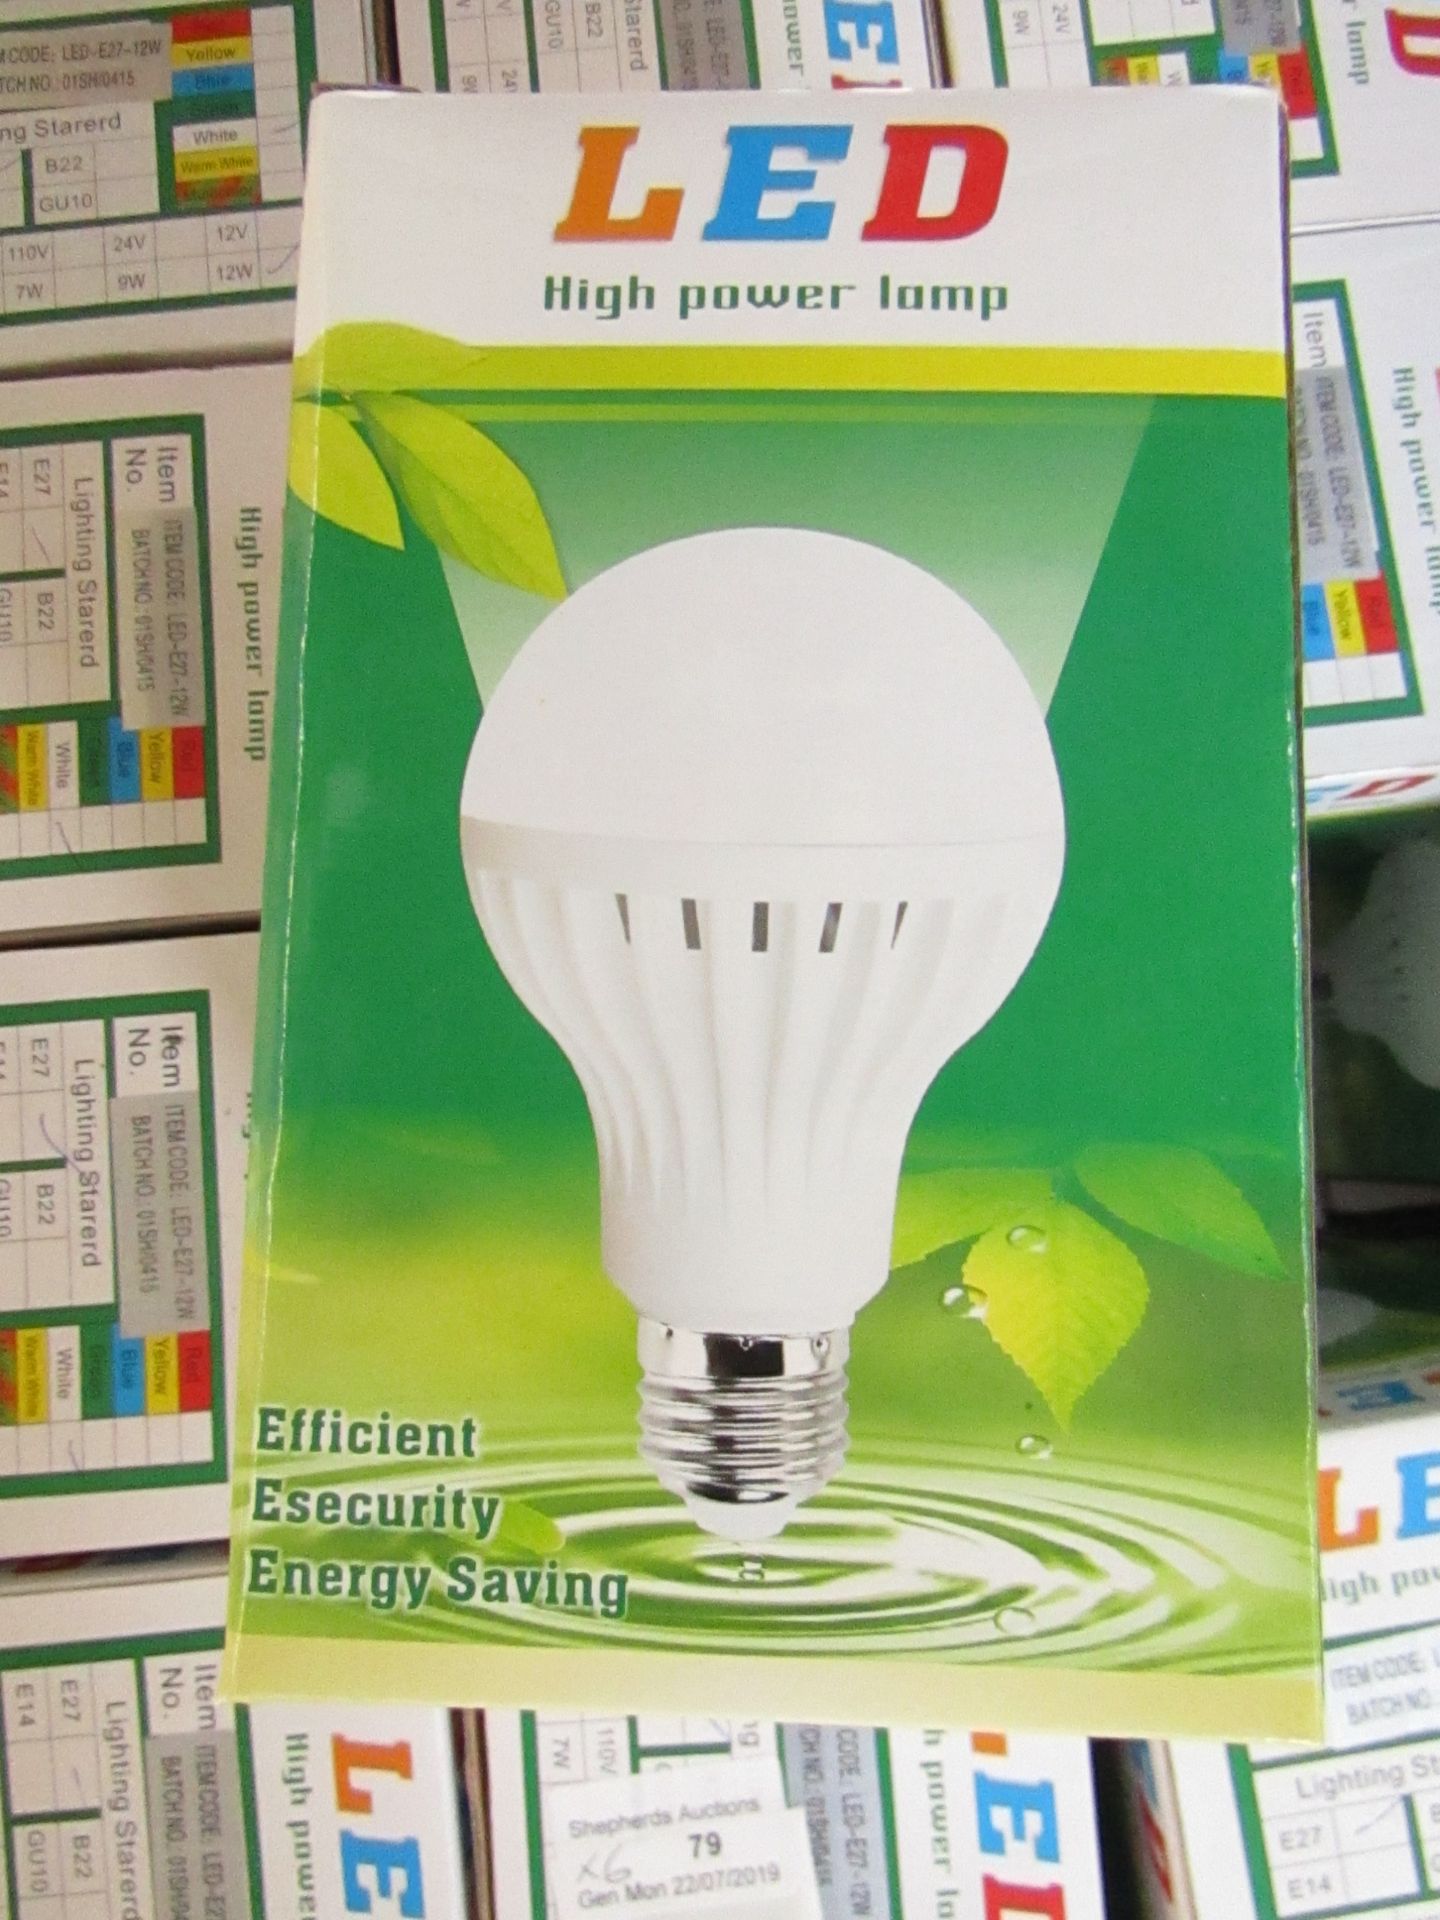 LED high power light bulb, boxed and new